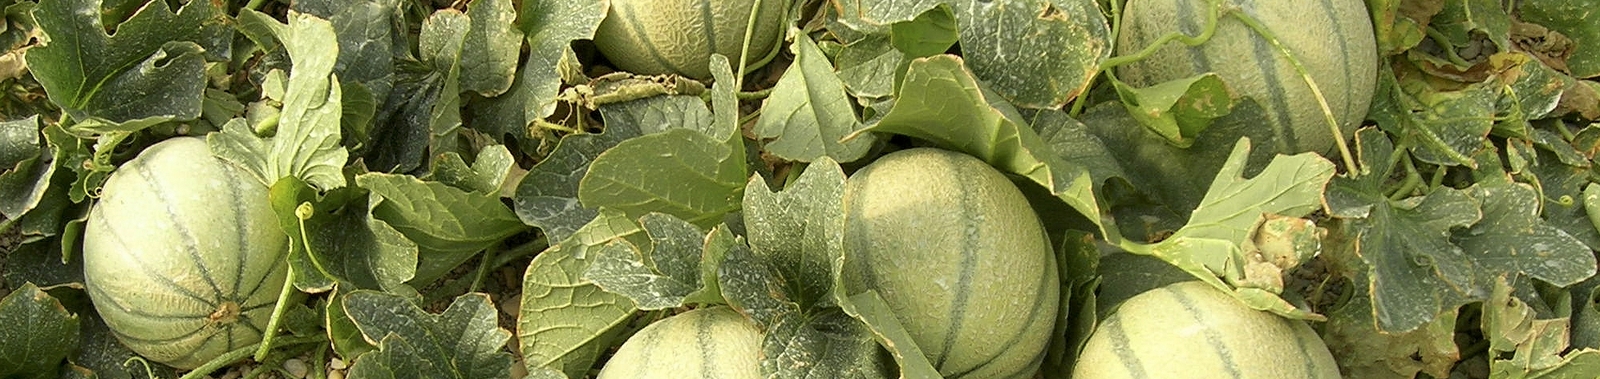 Role of Magnesium in Melon Production